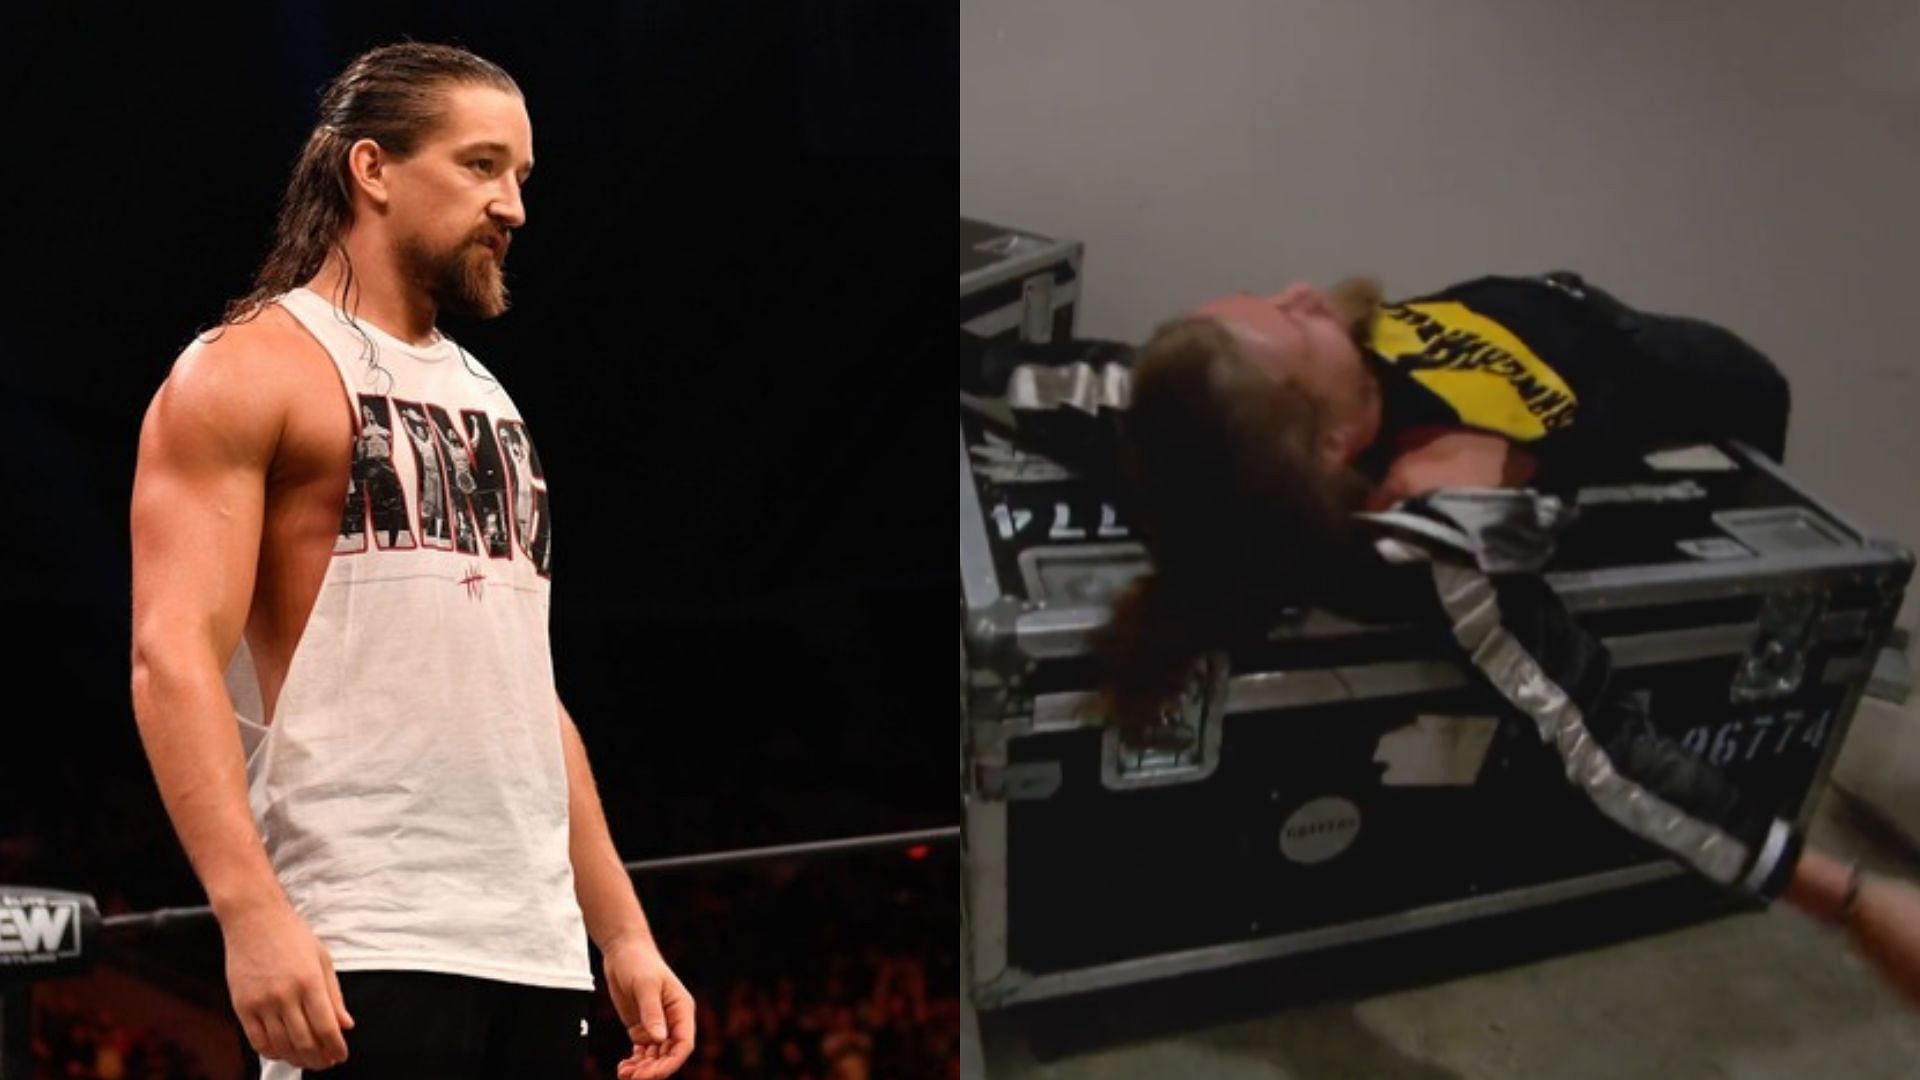 Jay White was attacked by a mysterious stable on Dynamite